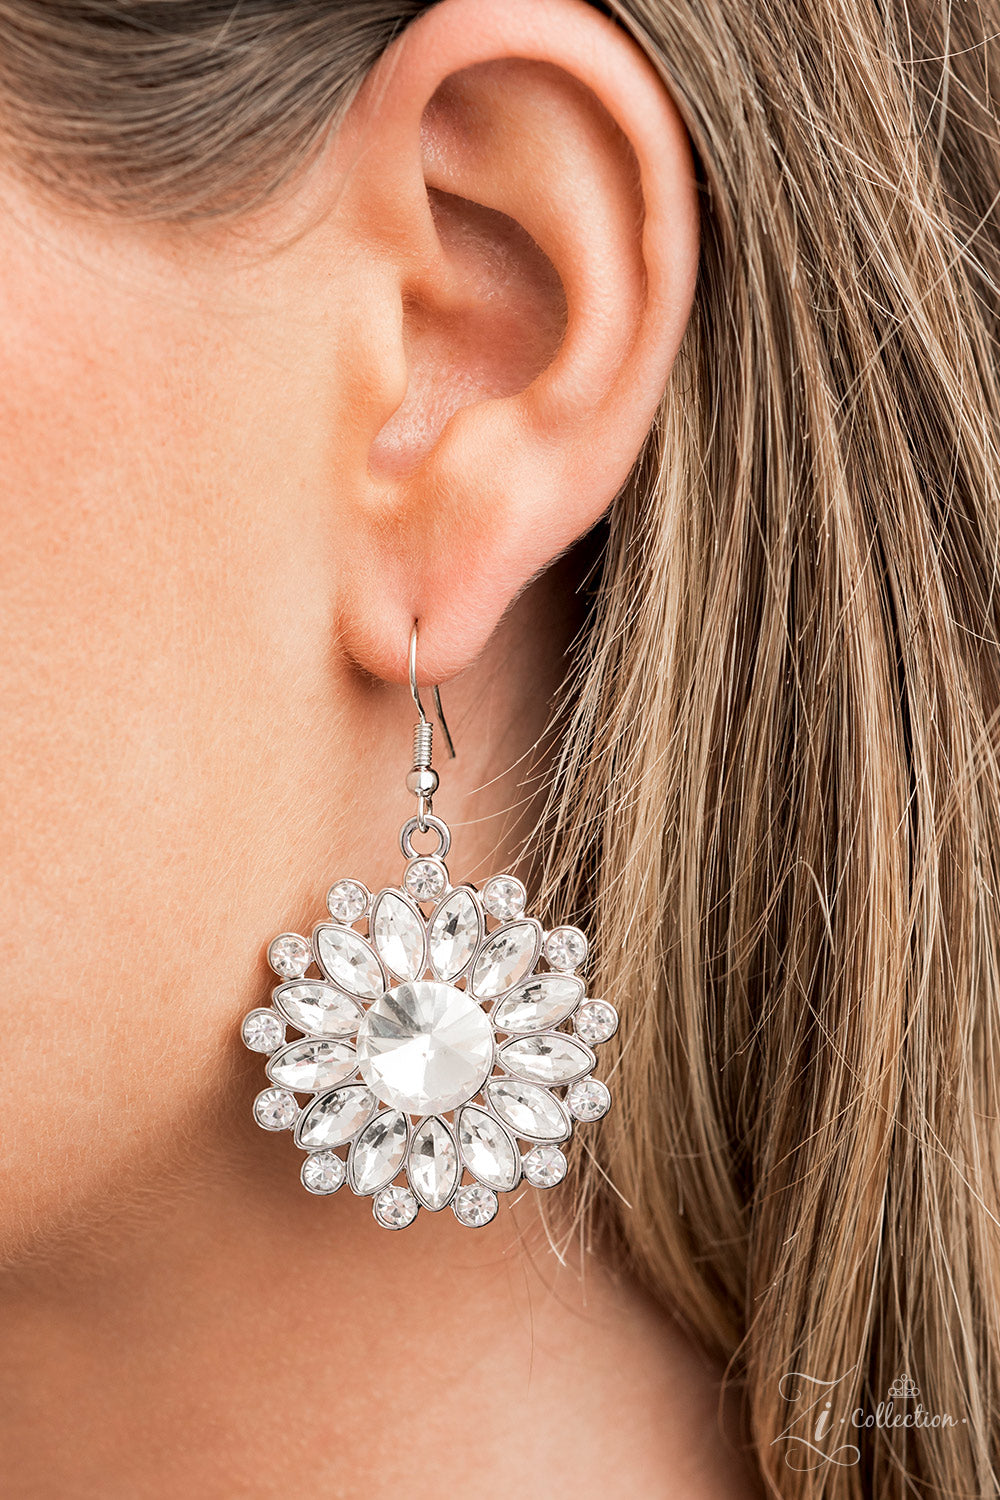 Paparazzi Accessories Optimistic Oversized classic white rhinestones are encircled by majestic marquise-cut rhinestones in the same radiant finish, creating a collection of stunning floral frames. Smaller white rhinestones fall in between each gorgeous ma